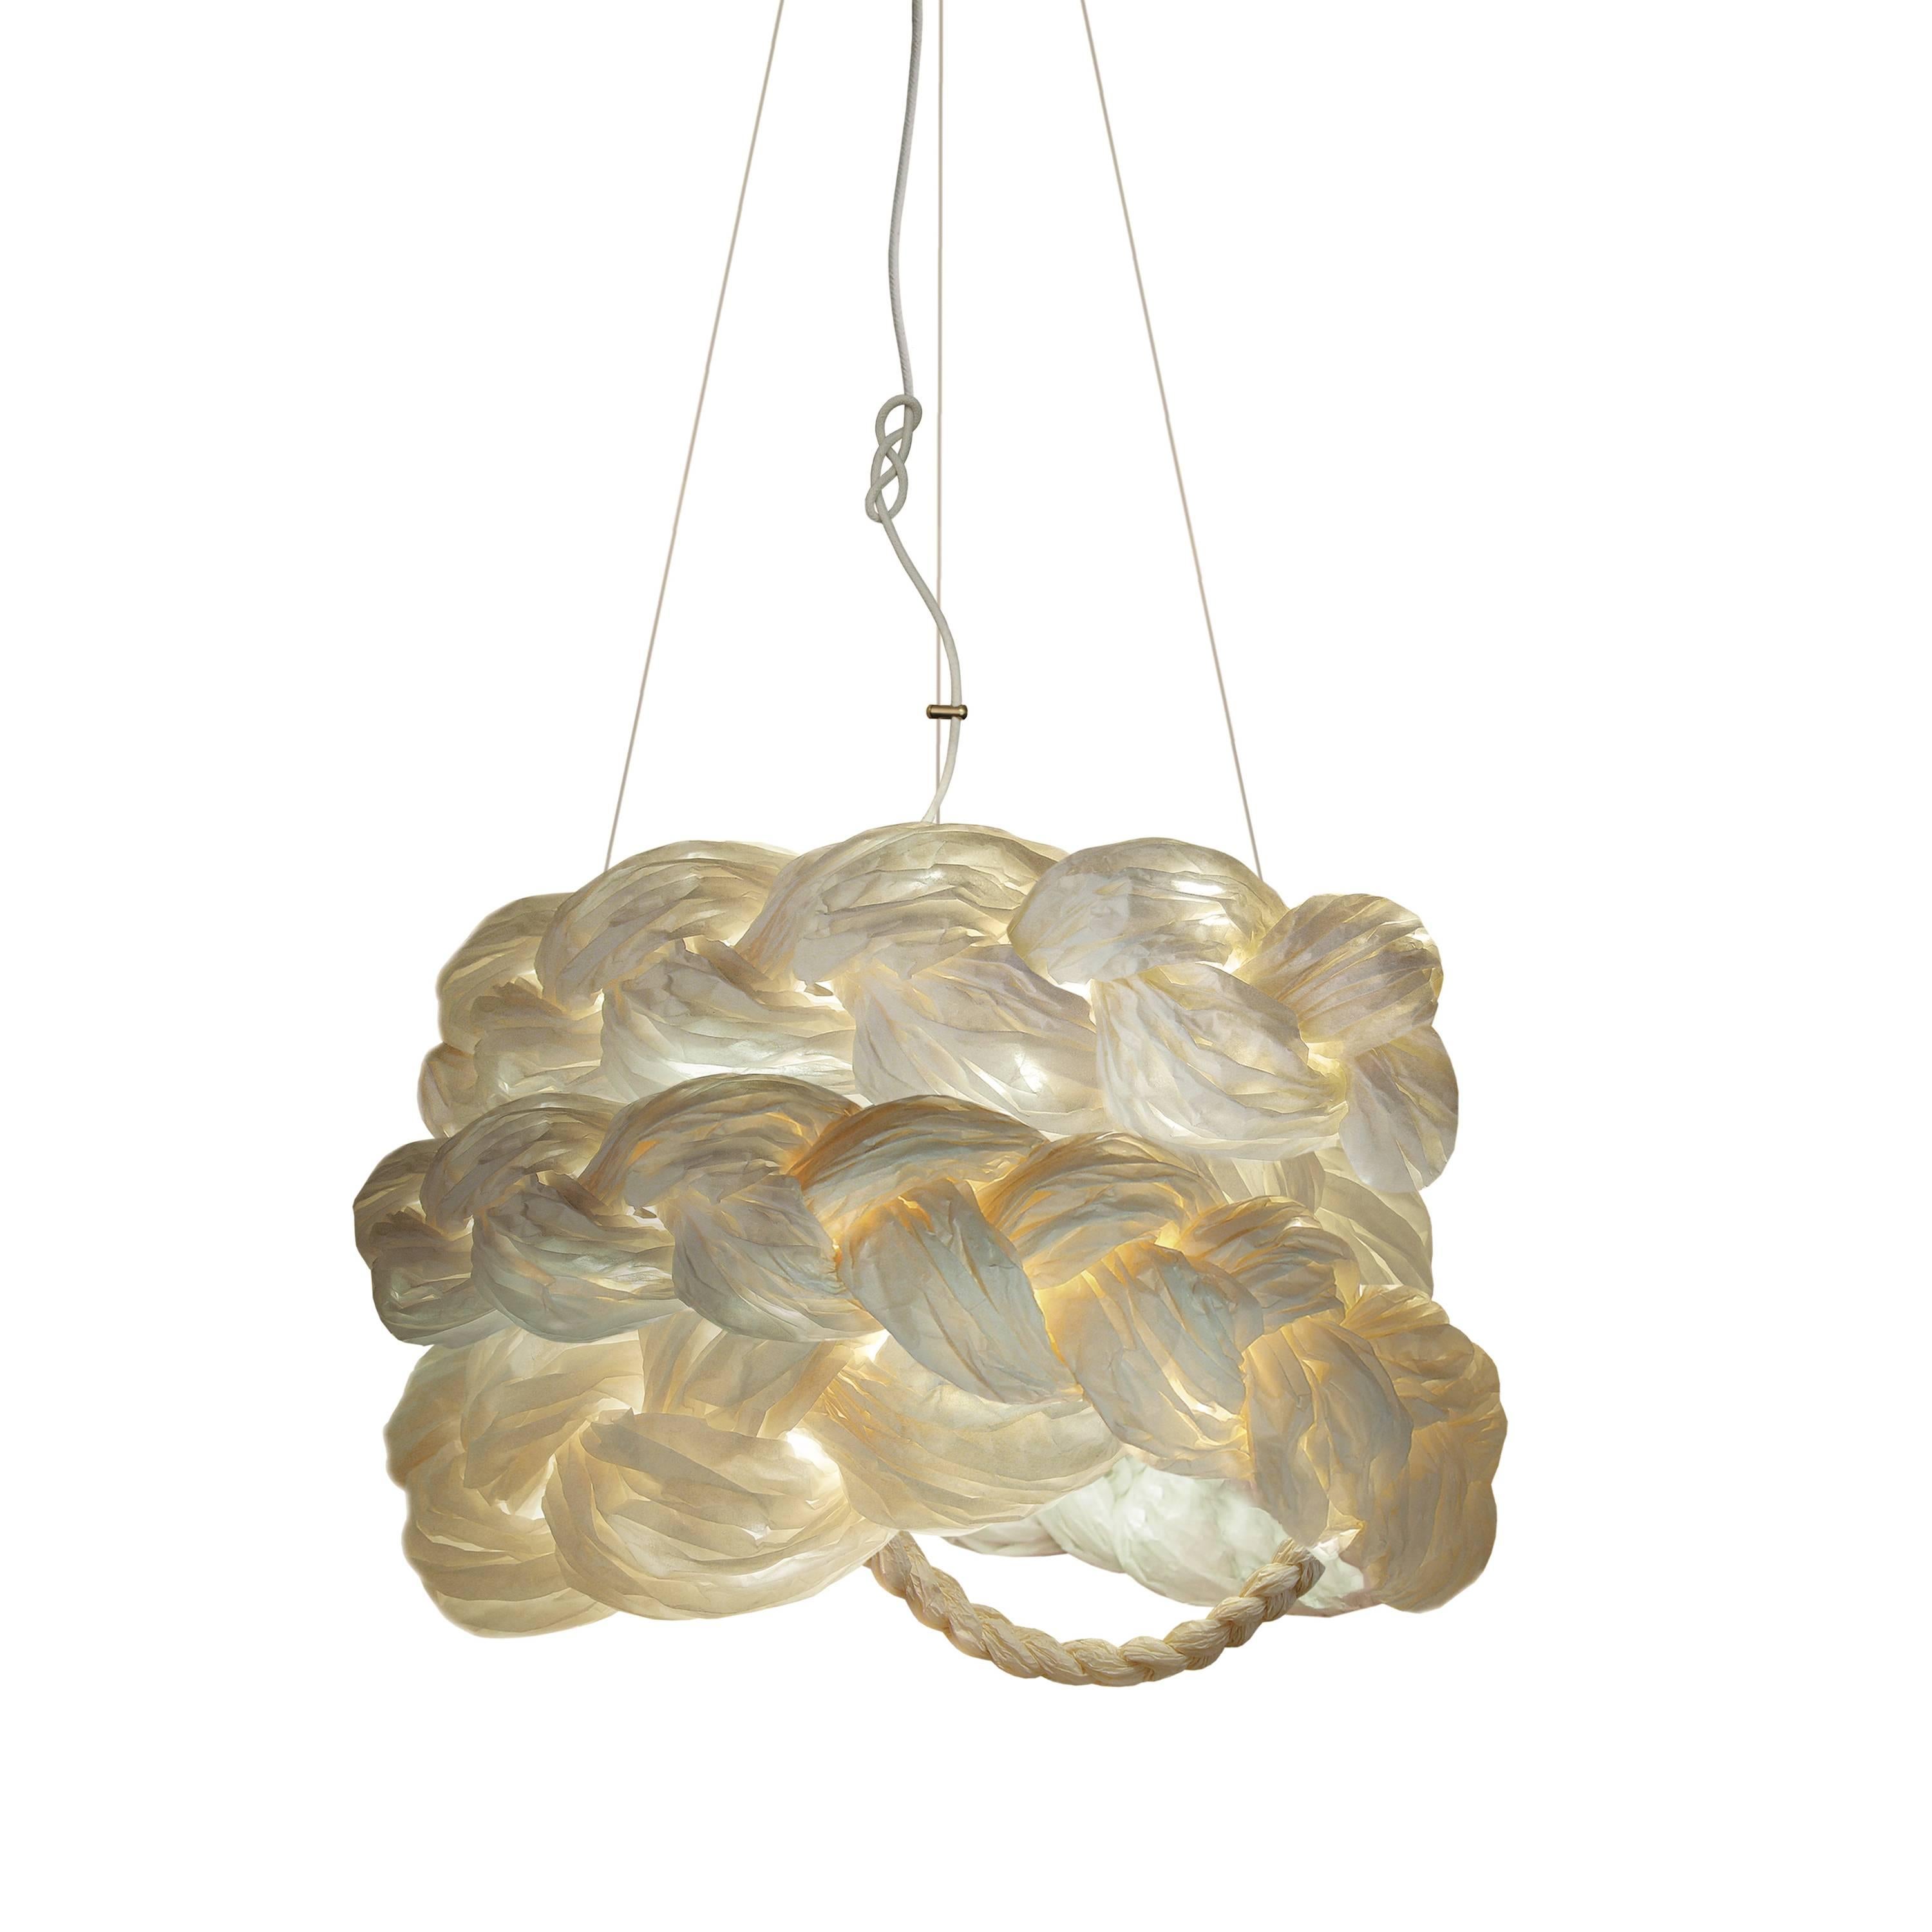 Bride Pendant Medium White-Ceiling Lamp Created from Paper For Sale